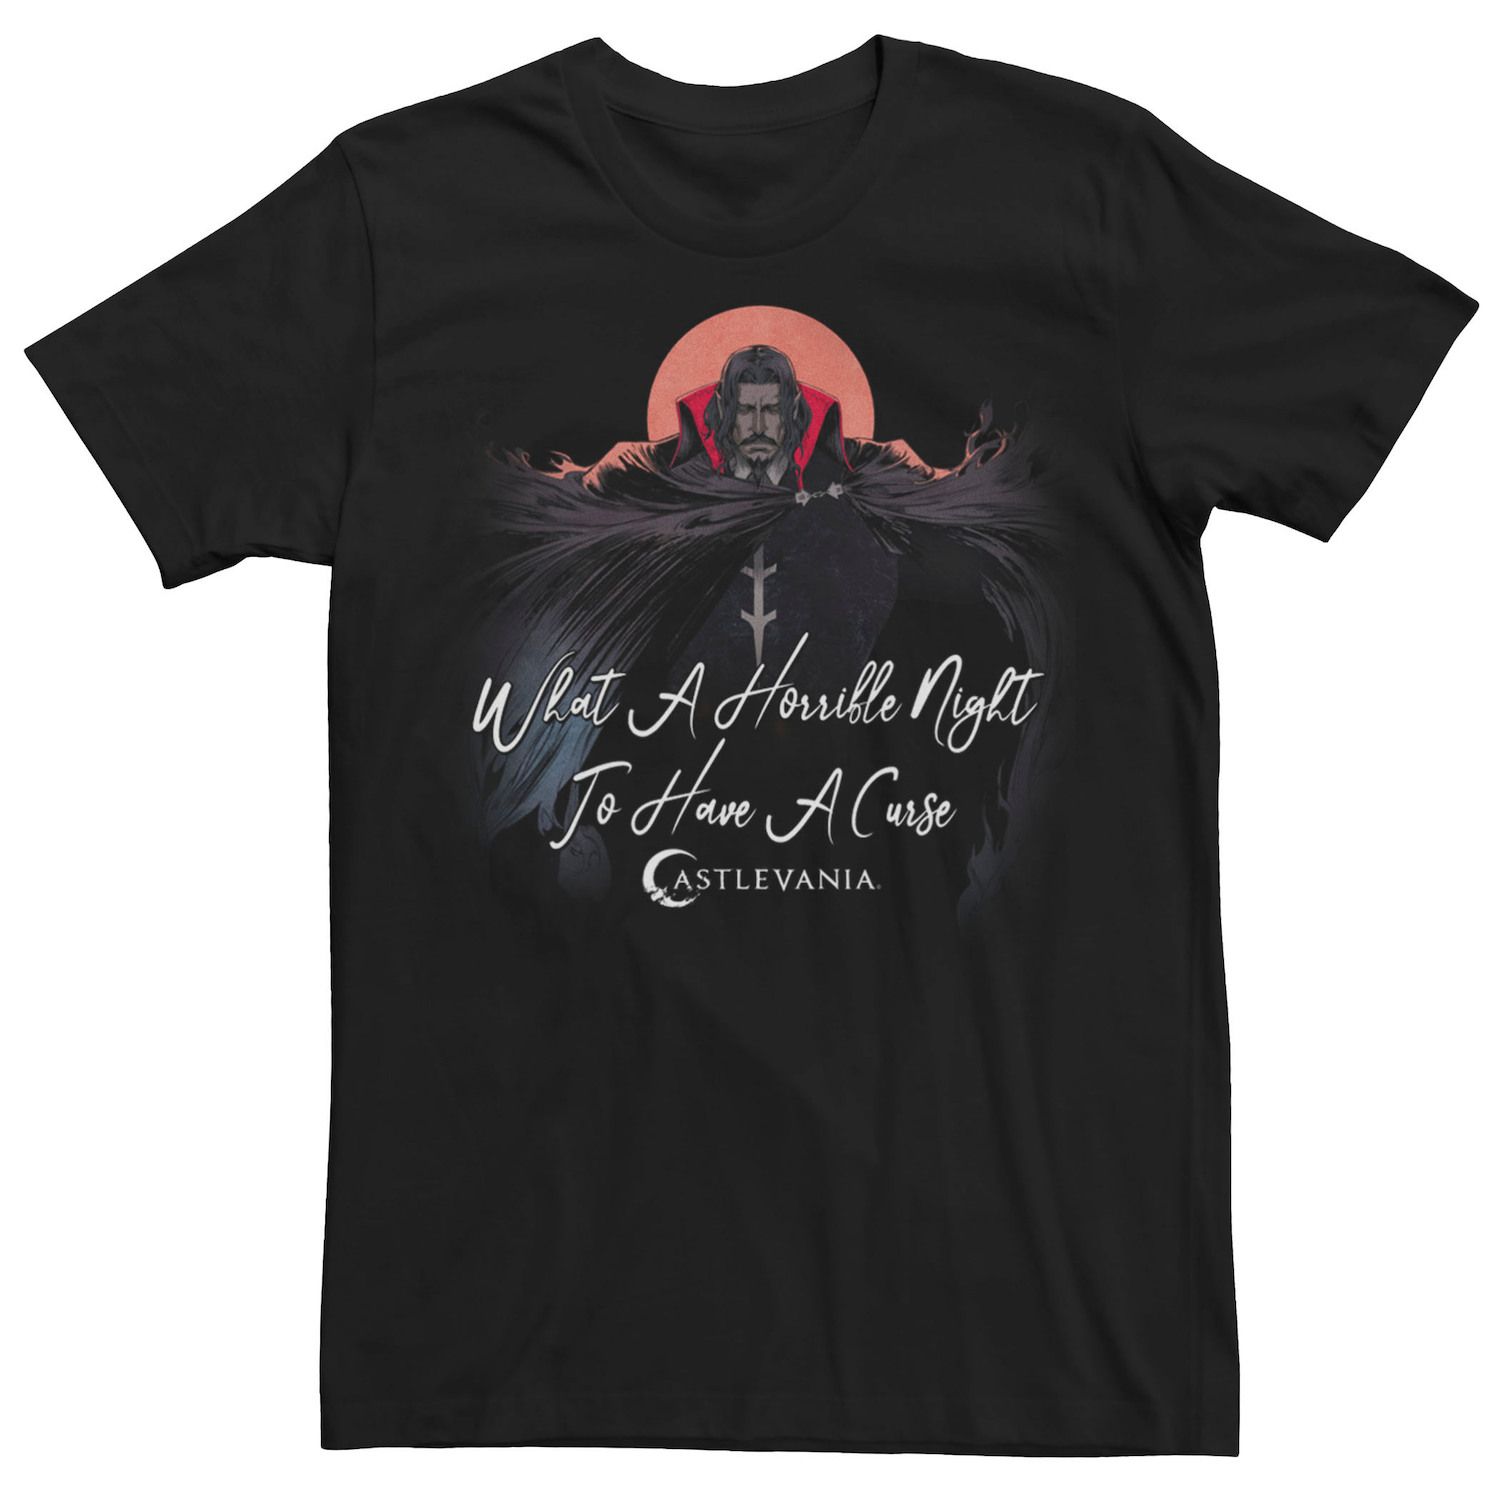 Мужская футболка Netflix Castlevania Dracula A Horrary Night To Have A Curse Tee Licensed Character